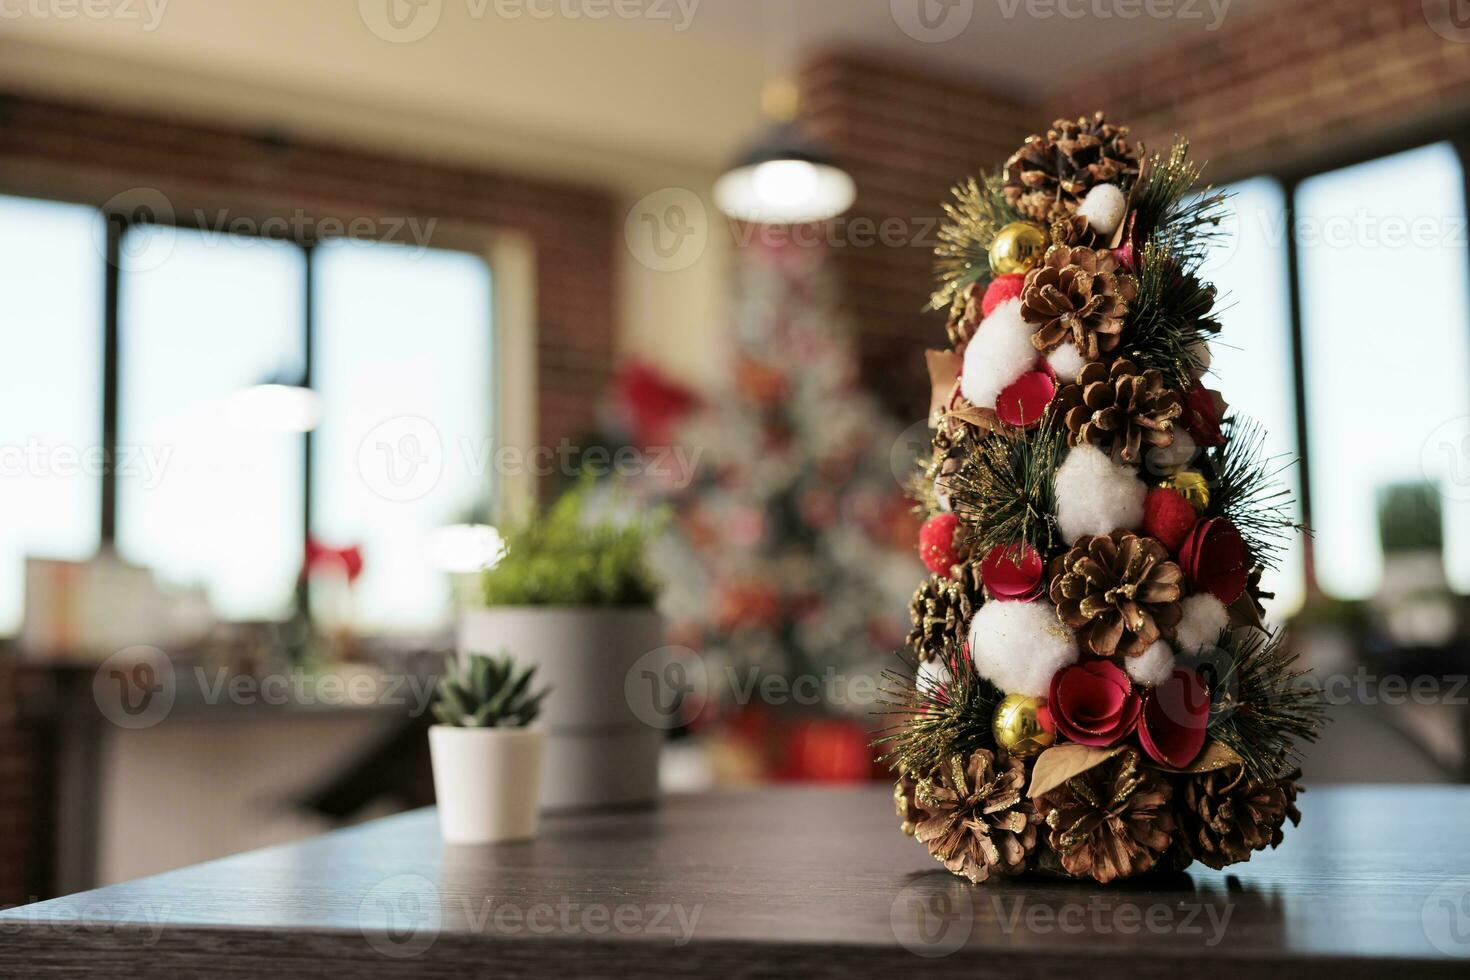 Decorated artificial christmas tree with ornaments and houseplant in festive office workplace closeup. Winter celebration season adornments in corporate workspace selective focus photo